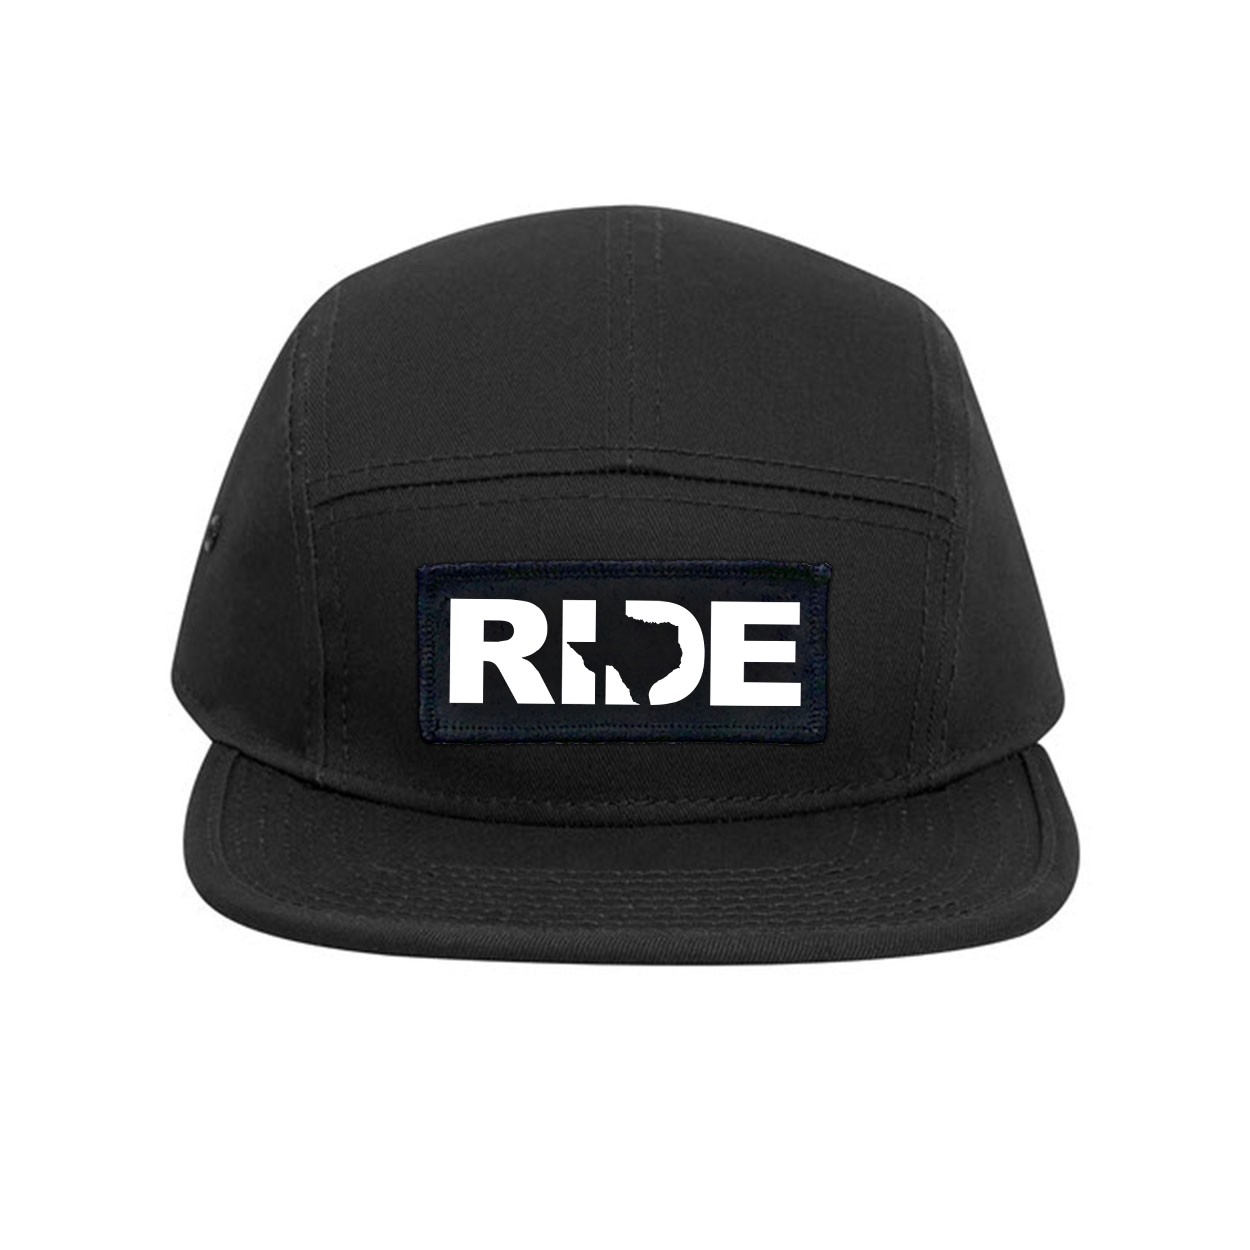 Ride Texas Classic Embroidered Snapback Trucker Hat Black